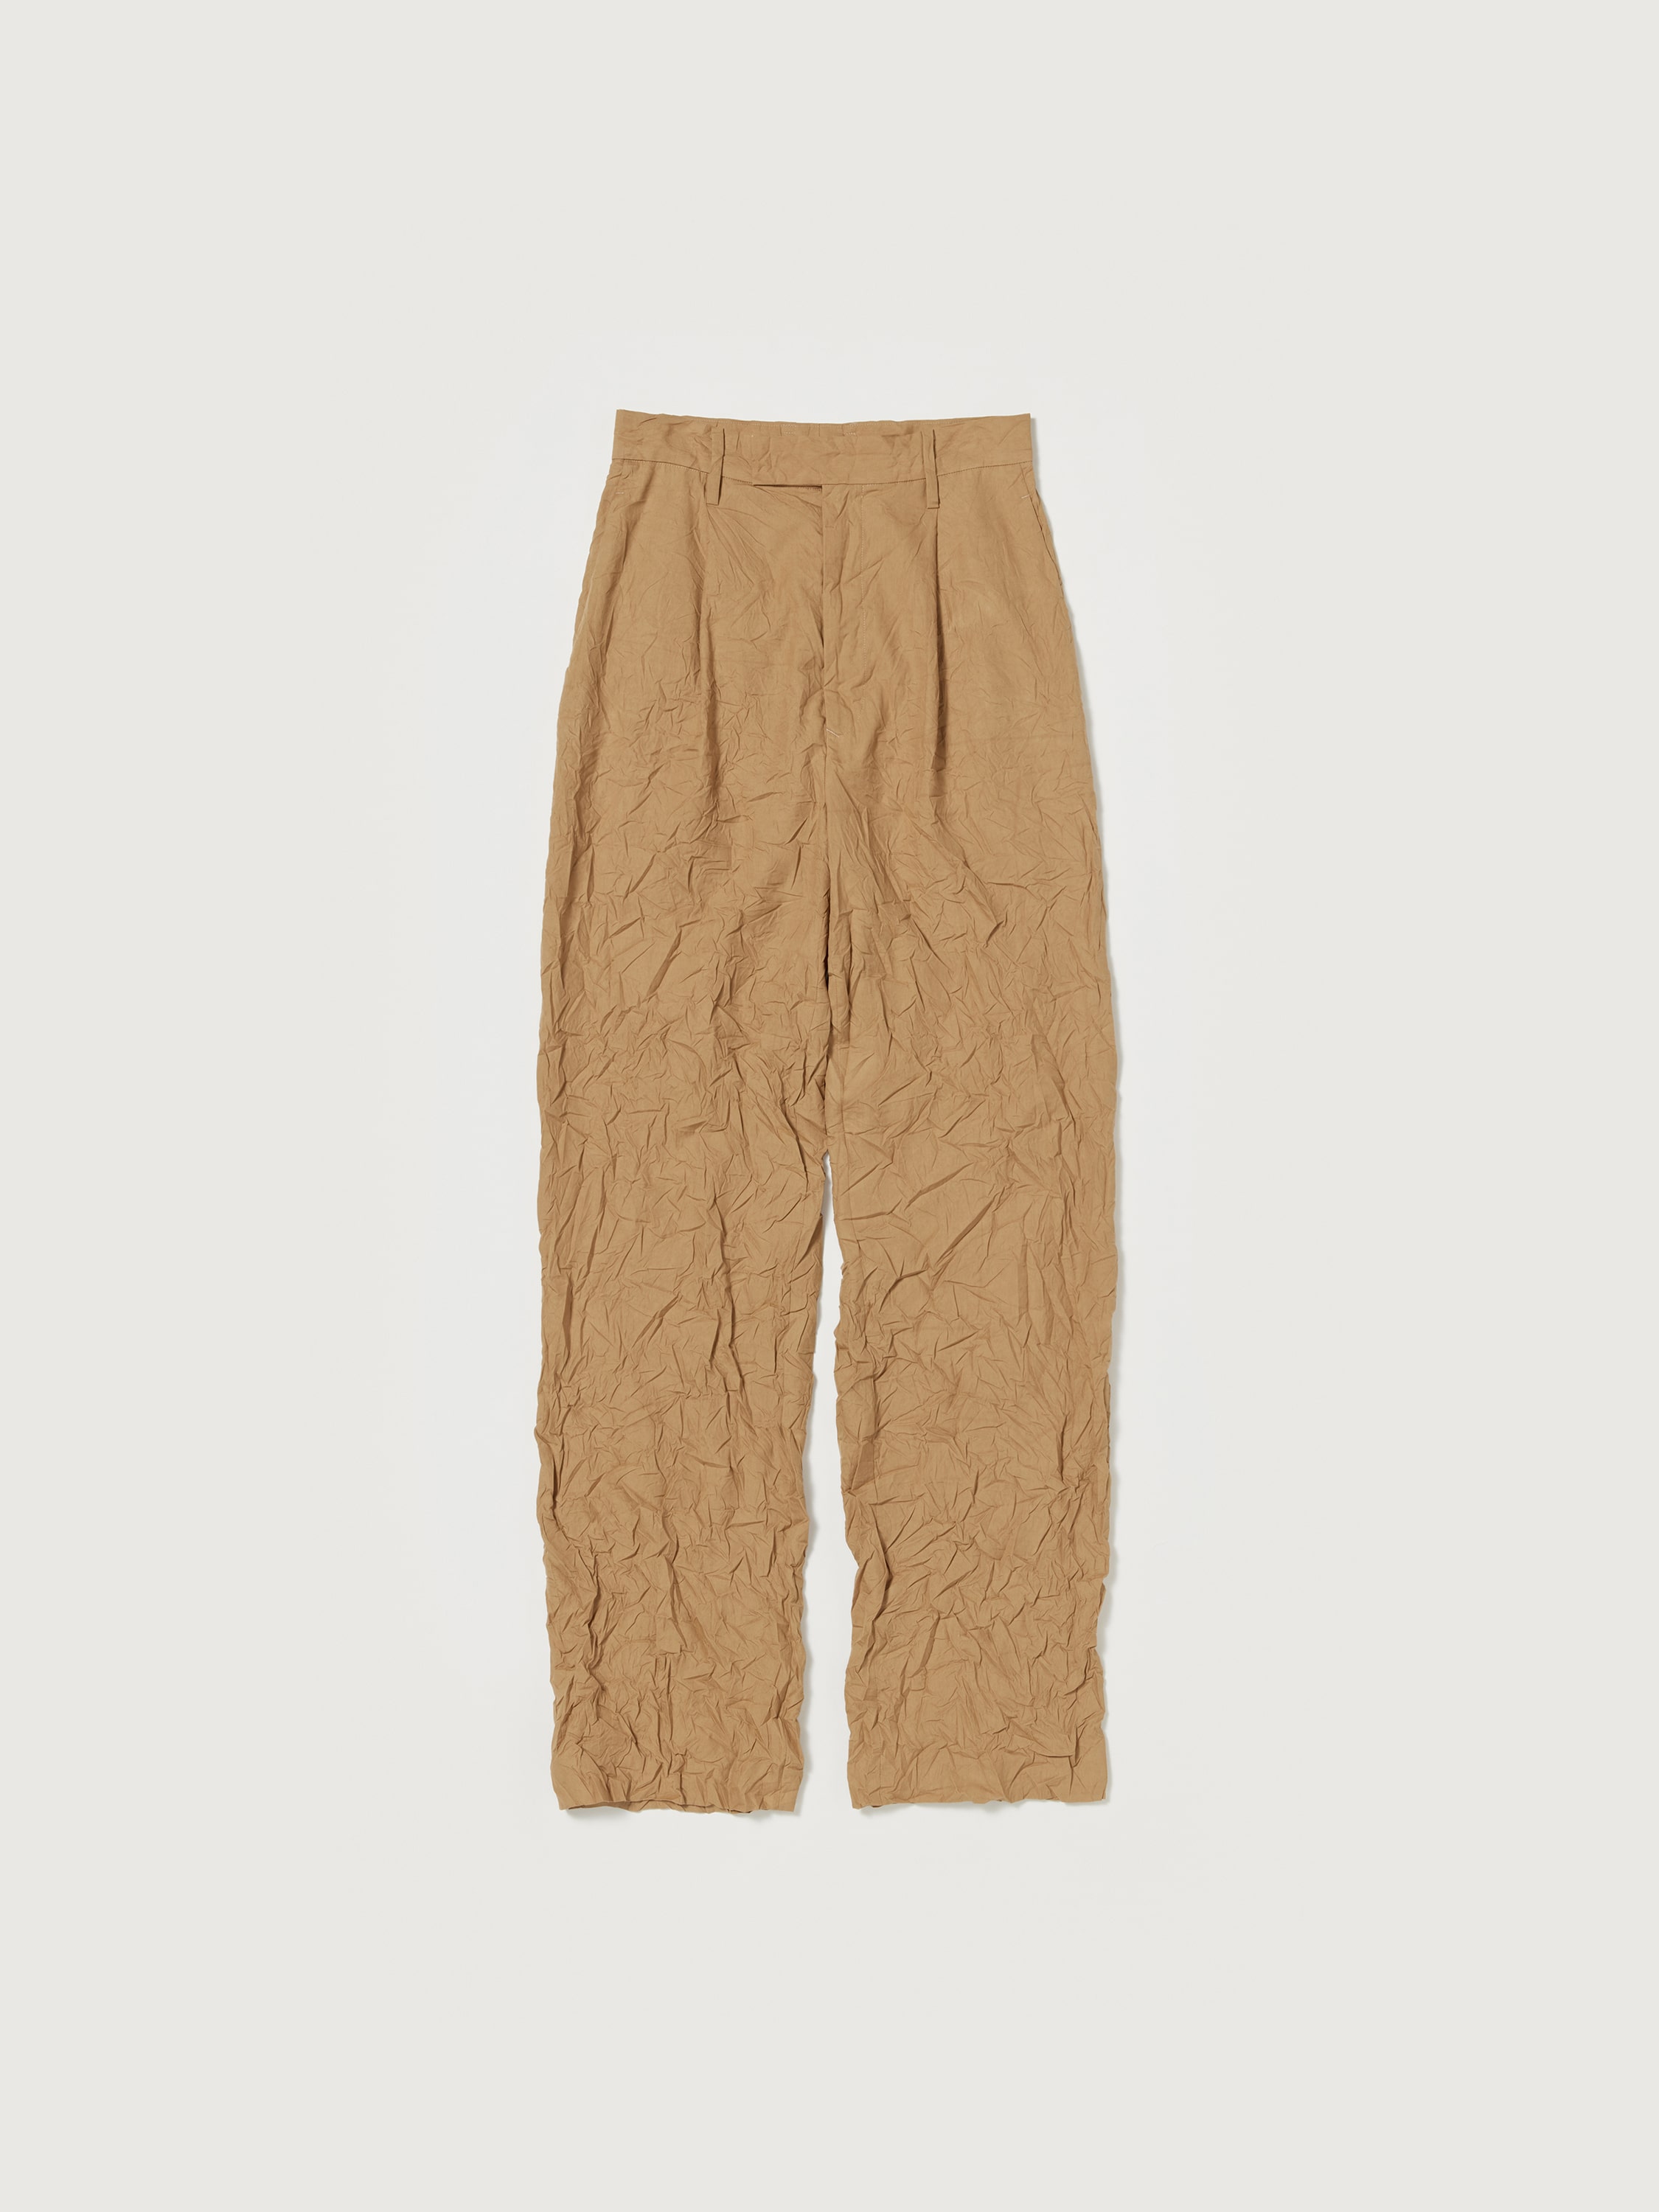 WRINKLED WASHED FINX TWILL PANTS 詳細画像 BROWN 4